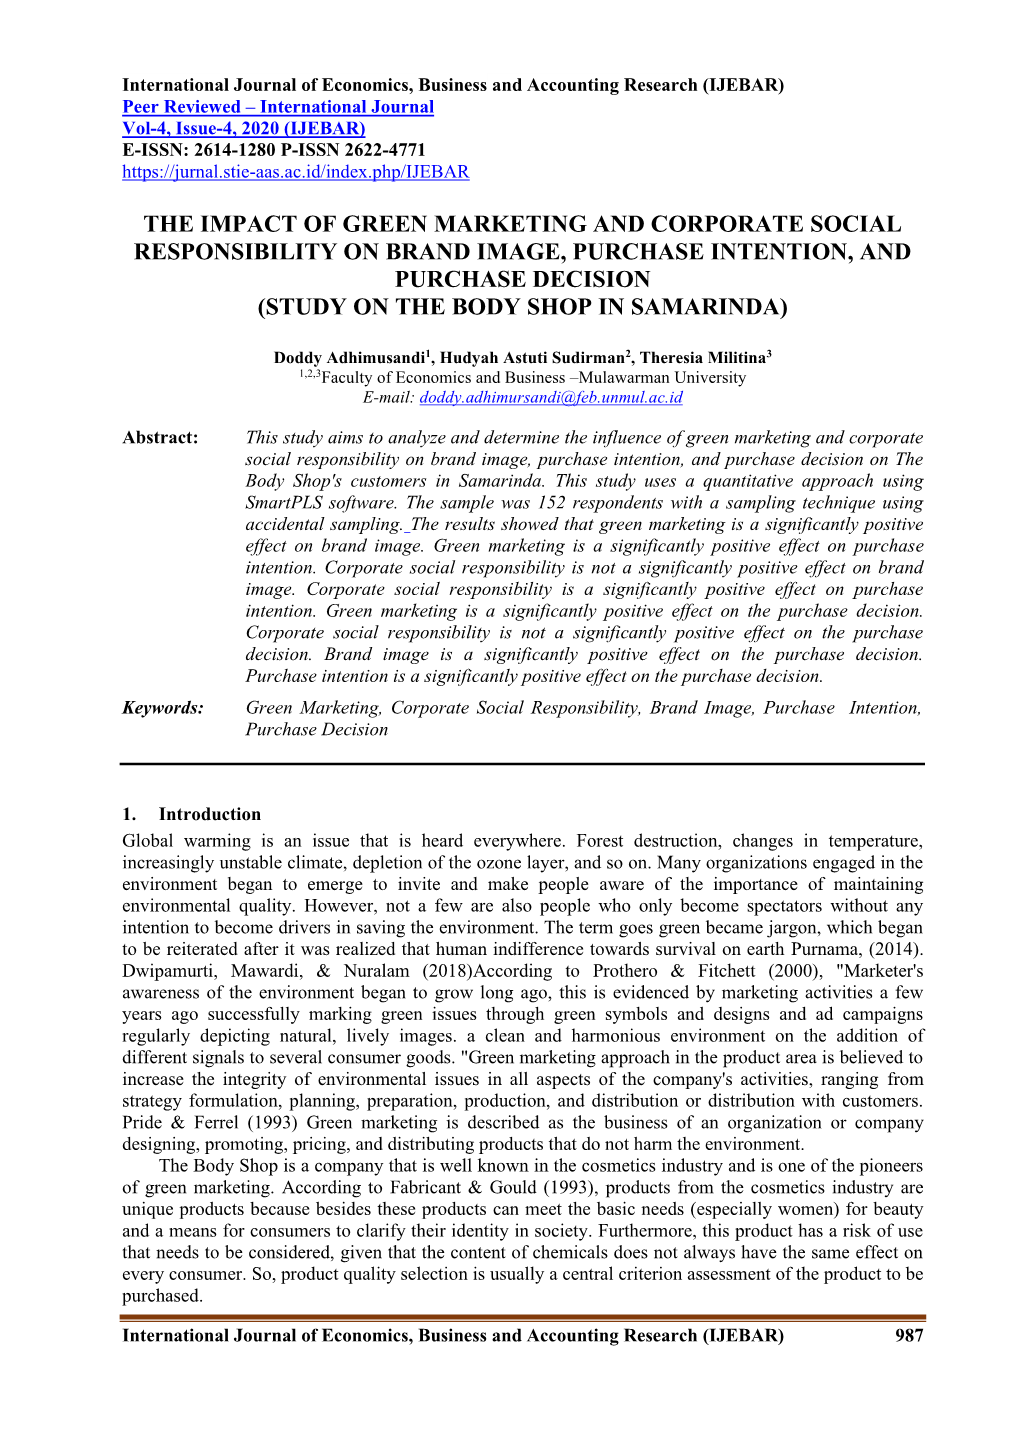 The Impact of Green Marketing and Corporate Social Responsibility on Brand Image, Purchase Intention, and Purchase Decision (Study on the Body Shop in Samarinda)